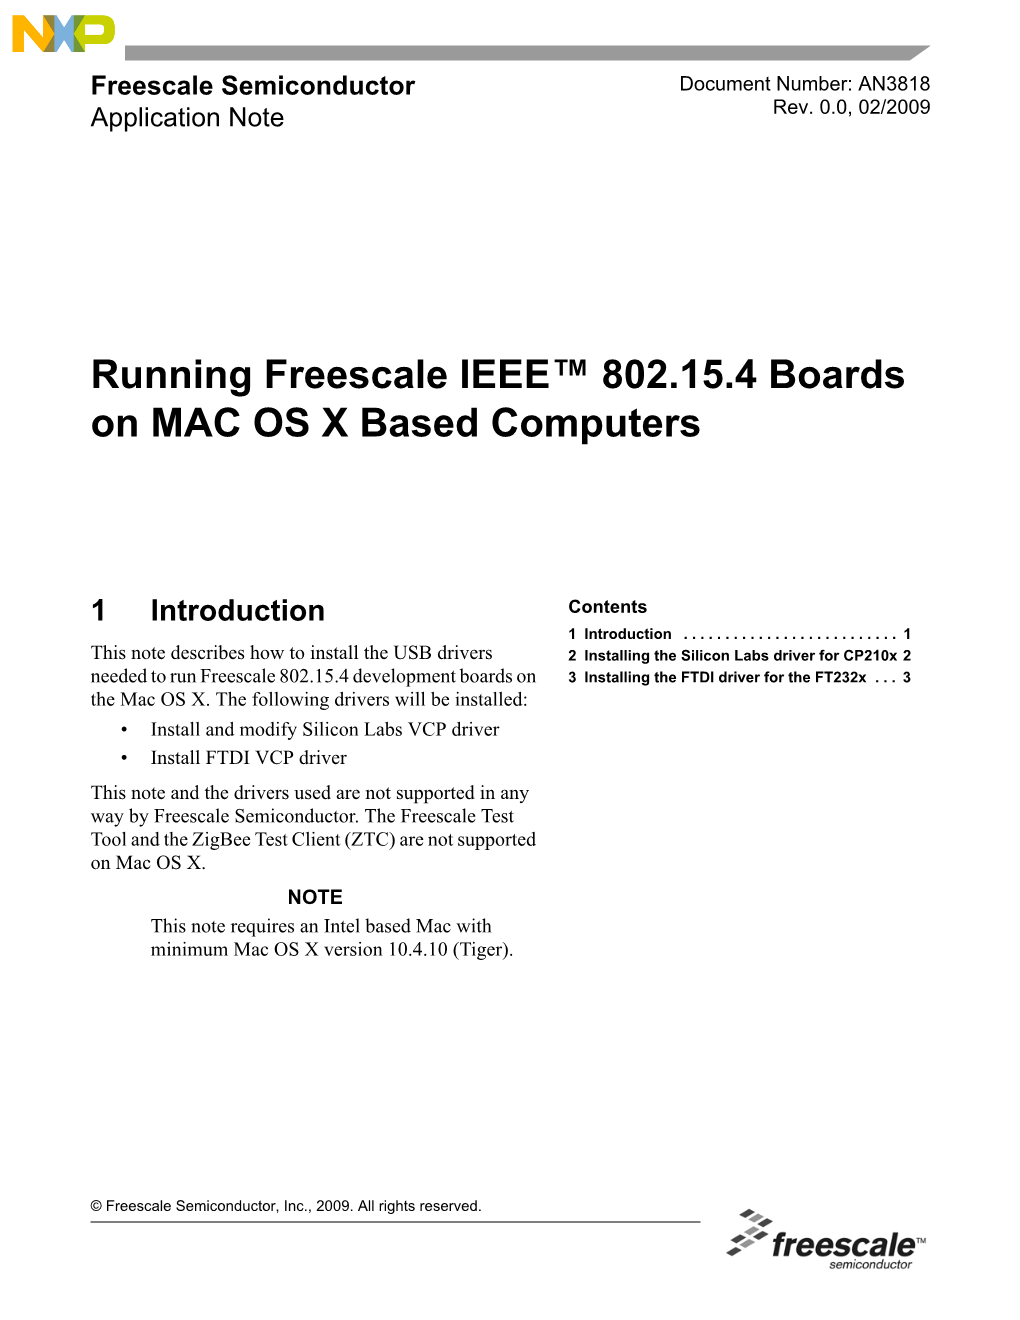 Running Freescale IEEE™ 802.15.4 Boards on MAC OS X Based Computers